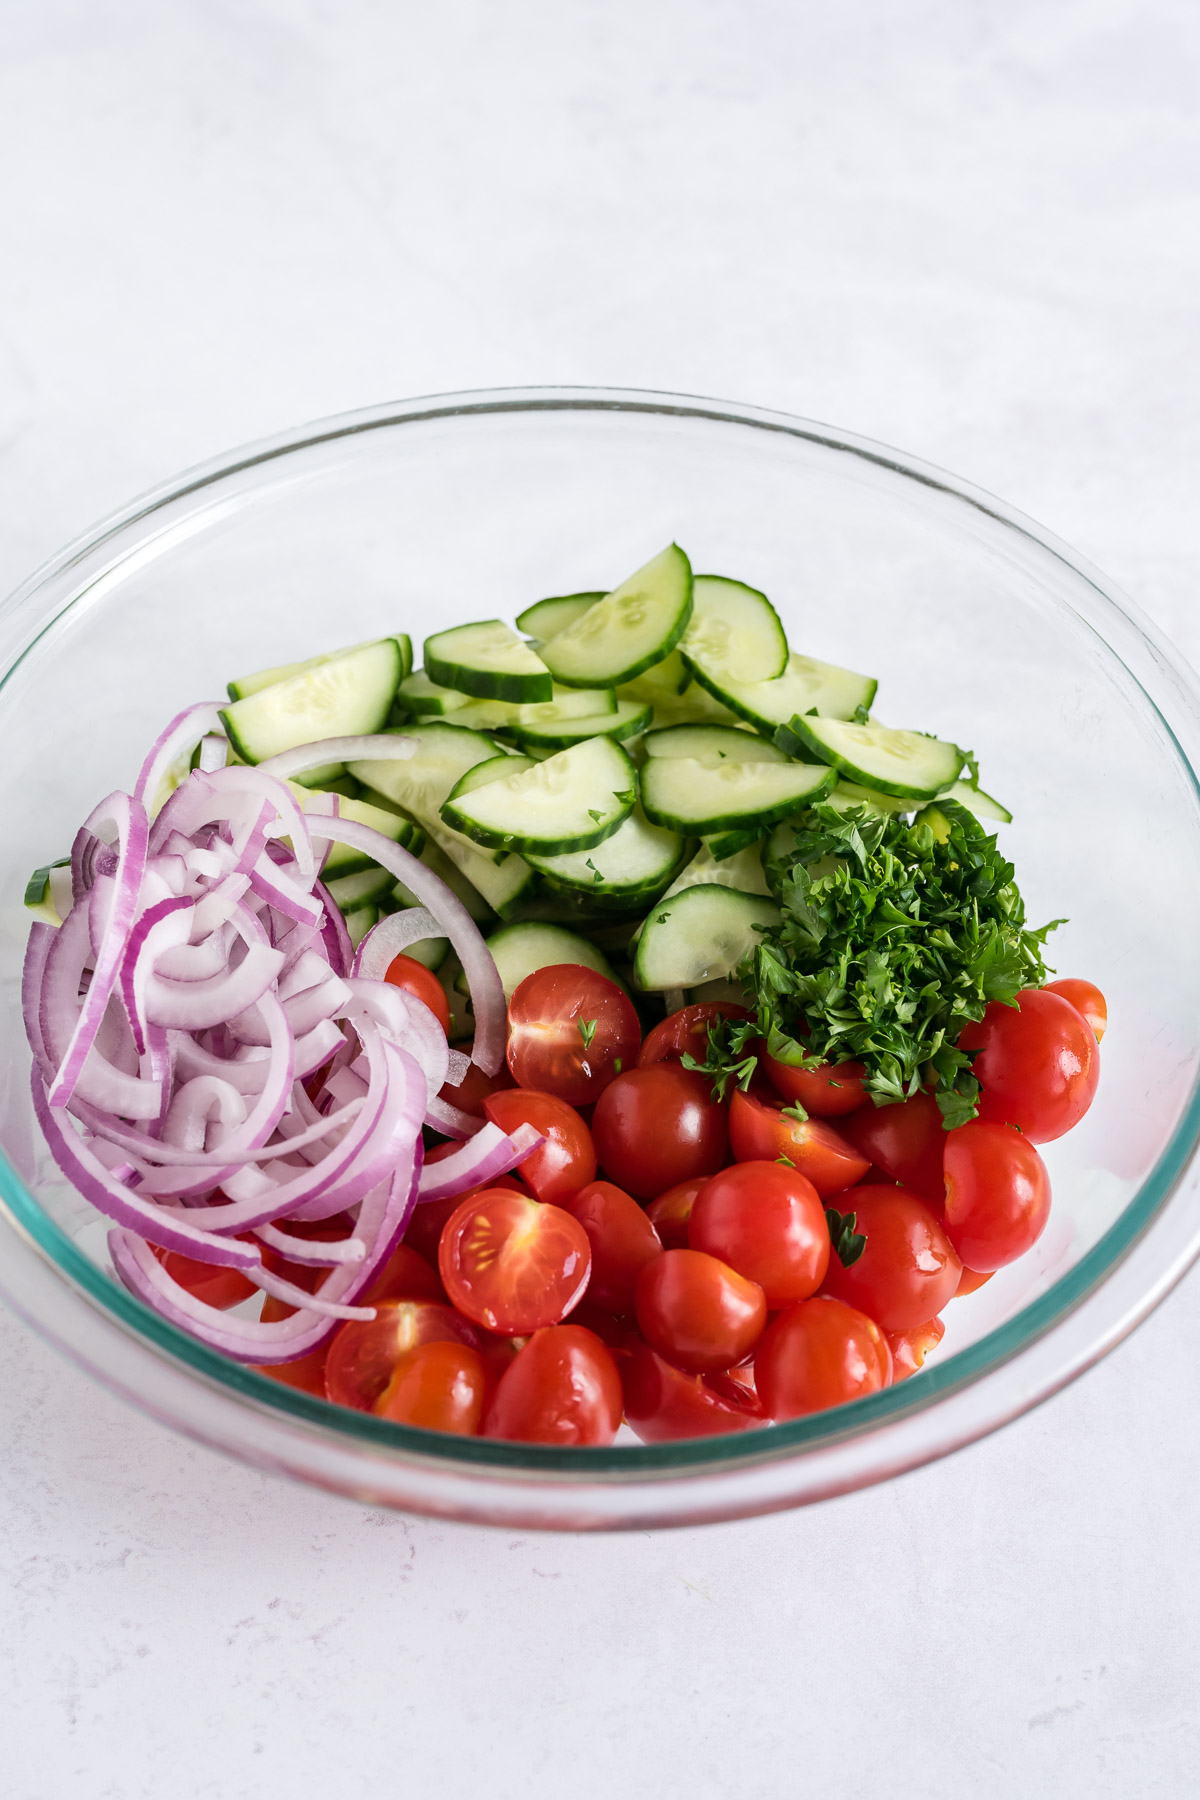 Sliced tomatoes, cucumbers, onions, and parsley in a glass bowl.